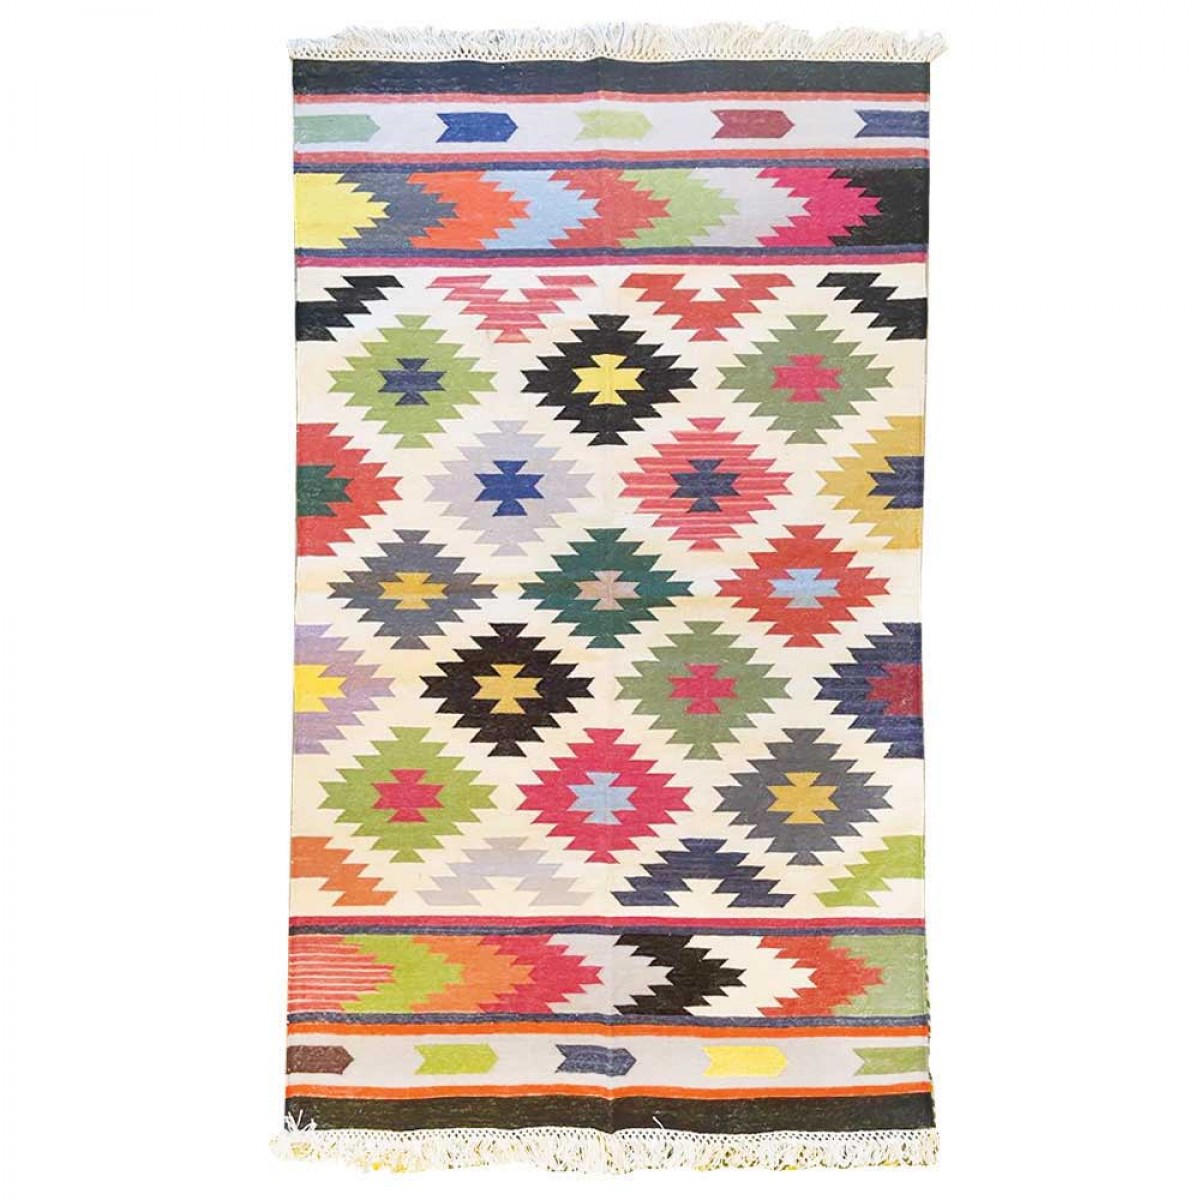 Cotton Floor Rugs - Multi Color Design (Made to Order)